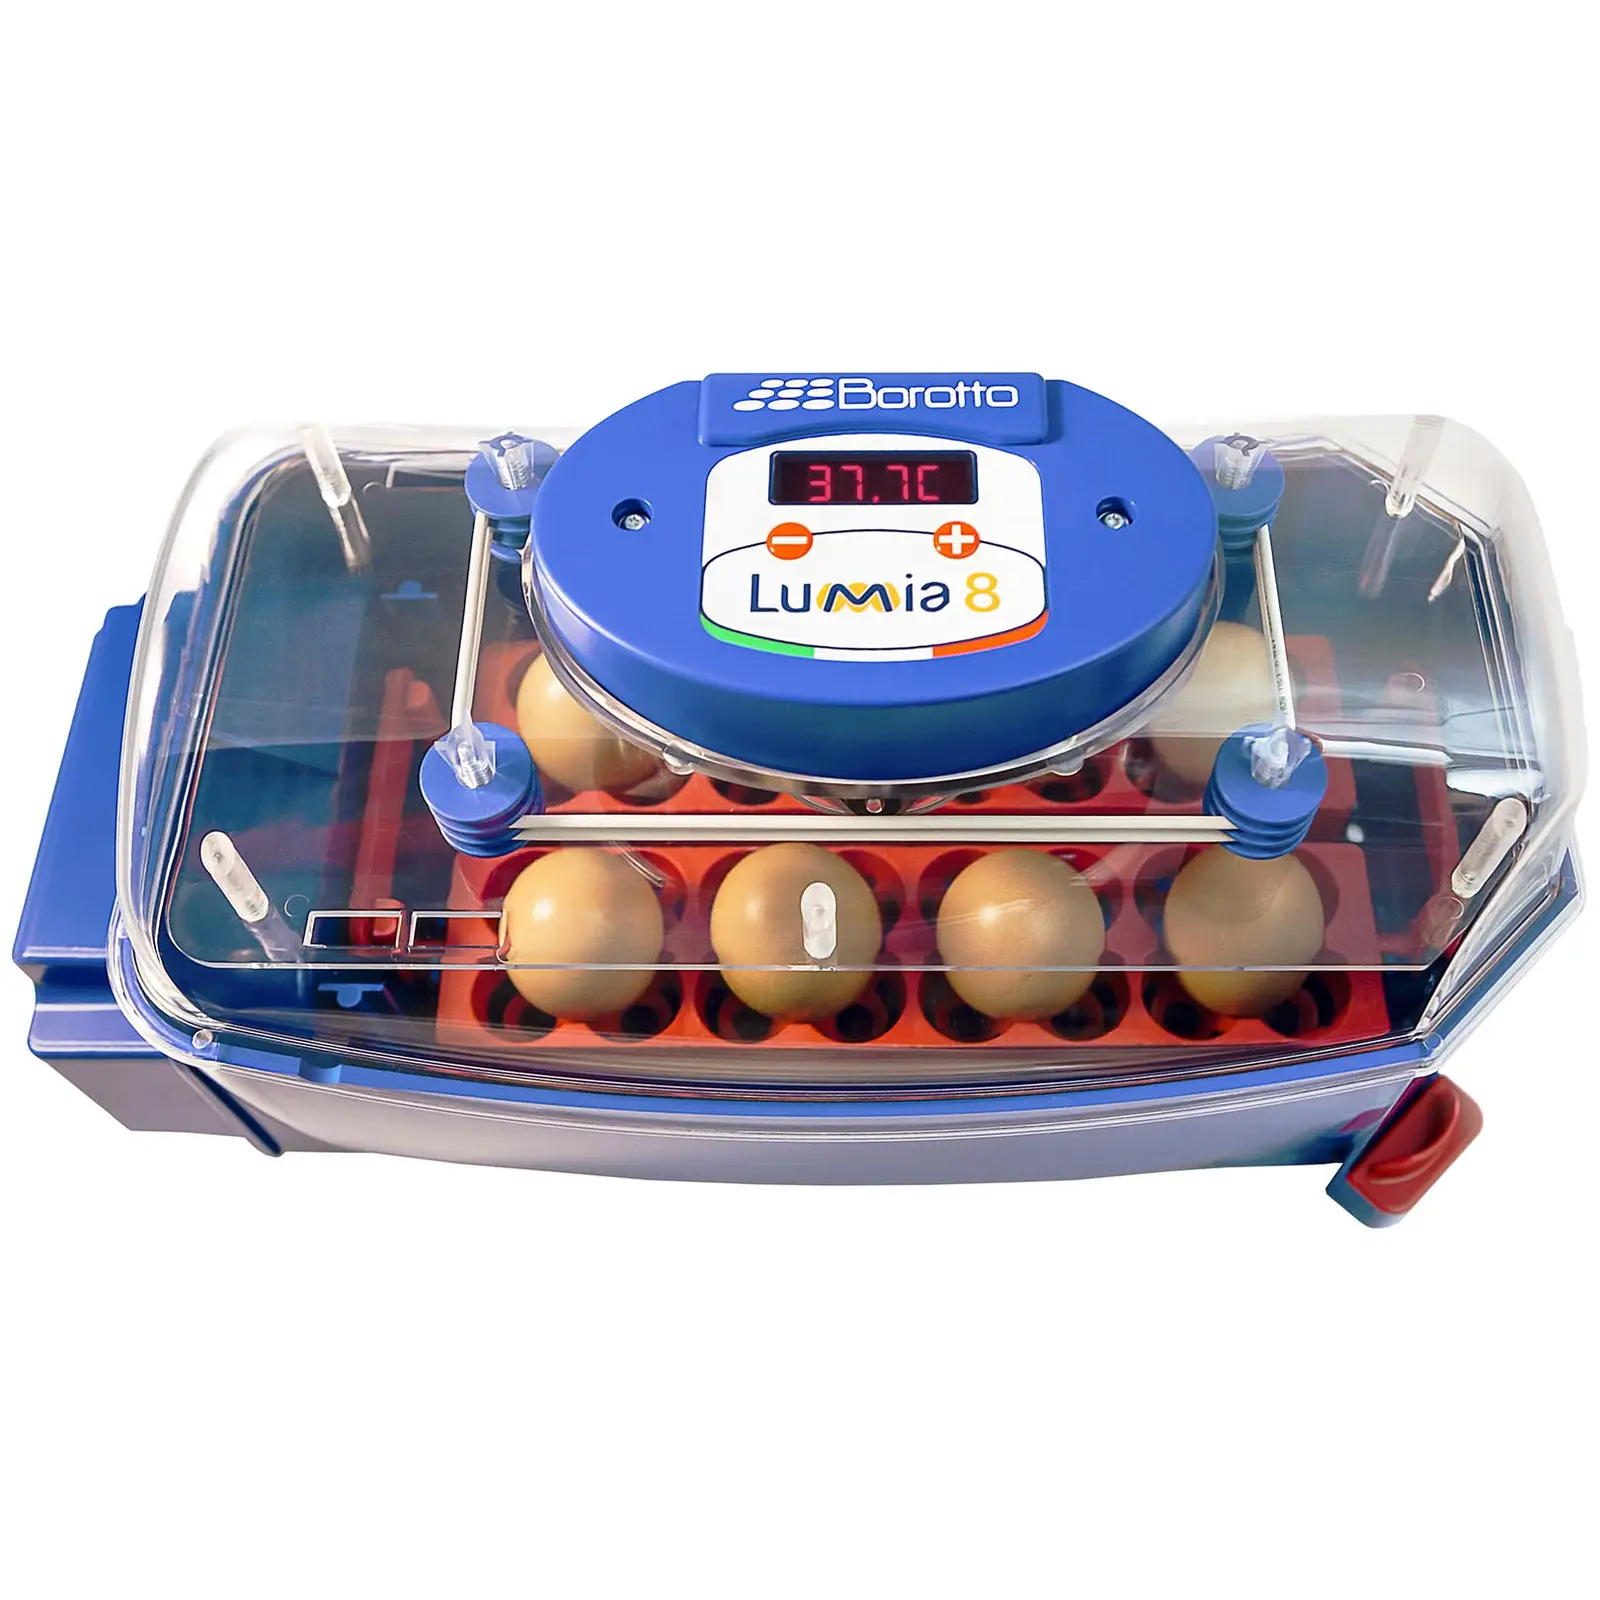 Incubator - 8 eggs - including watering system - fully automatic